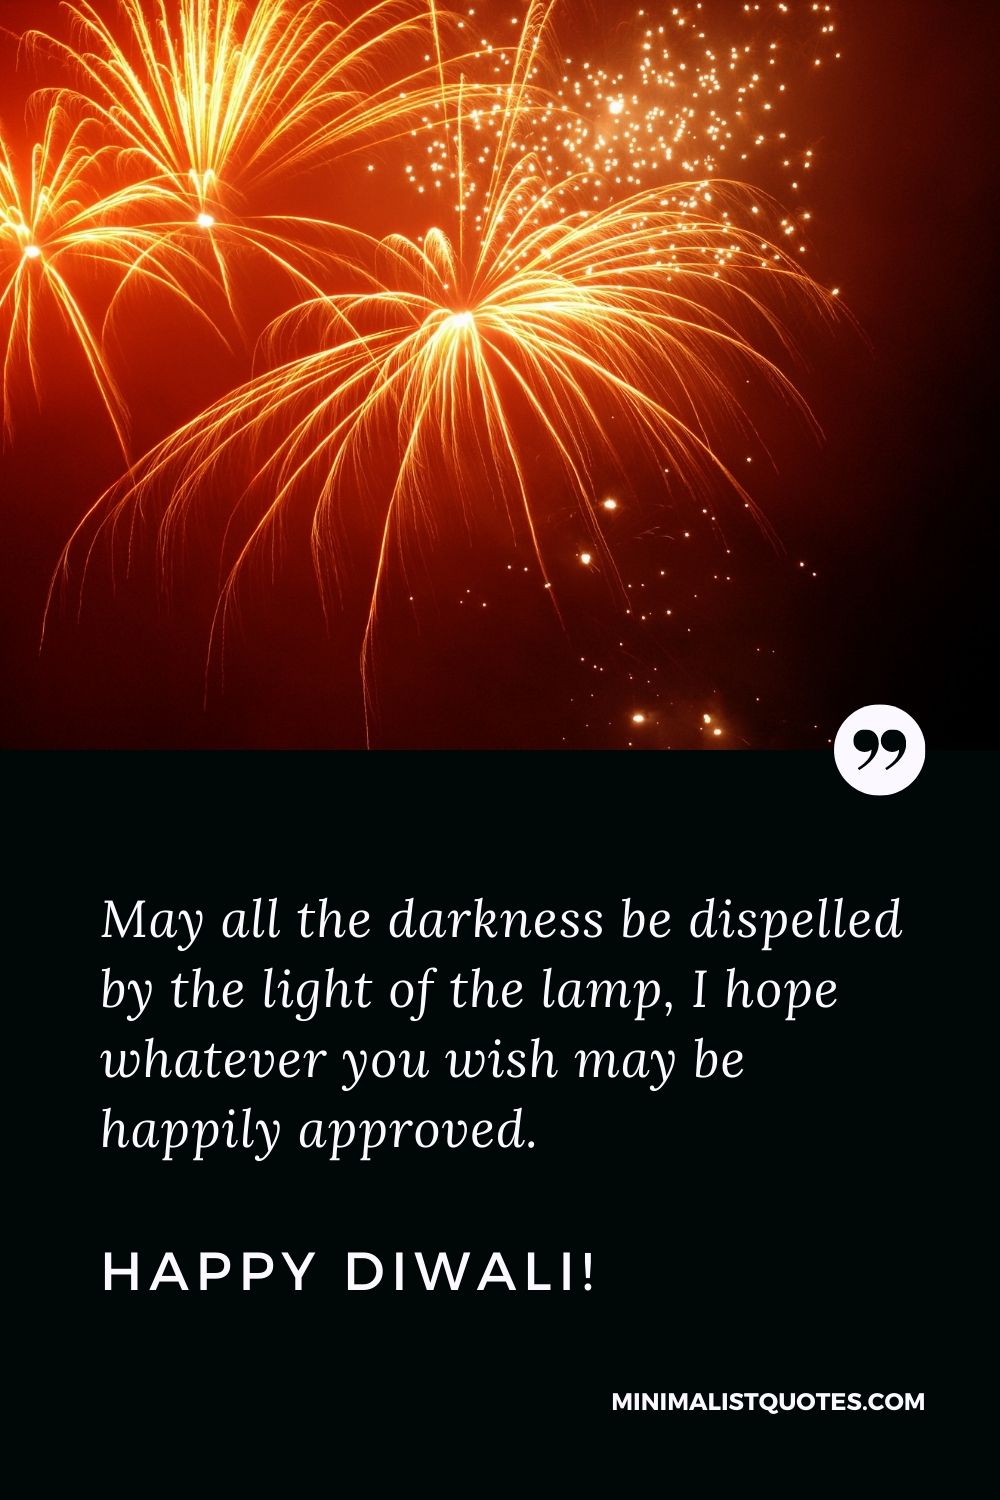 Diwali Quote, Wish & Message With Image: May all the darkness be dispelled by the light of the lamp, I hope whatever you wish may be happily approved. Happy Diwali!